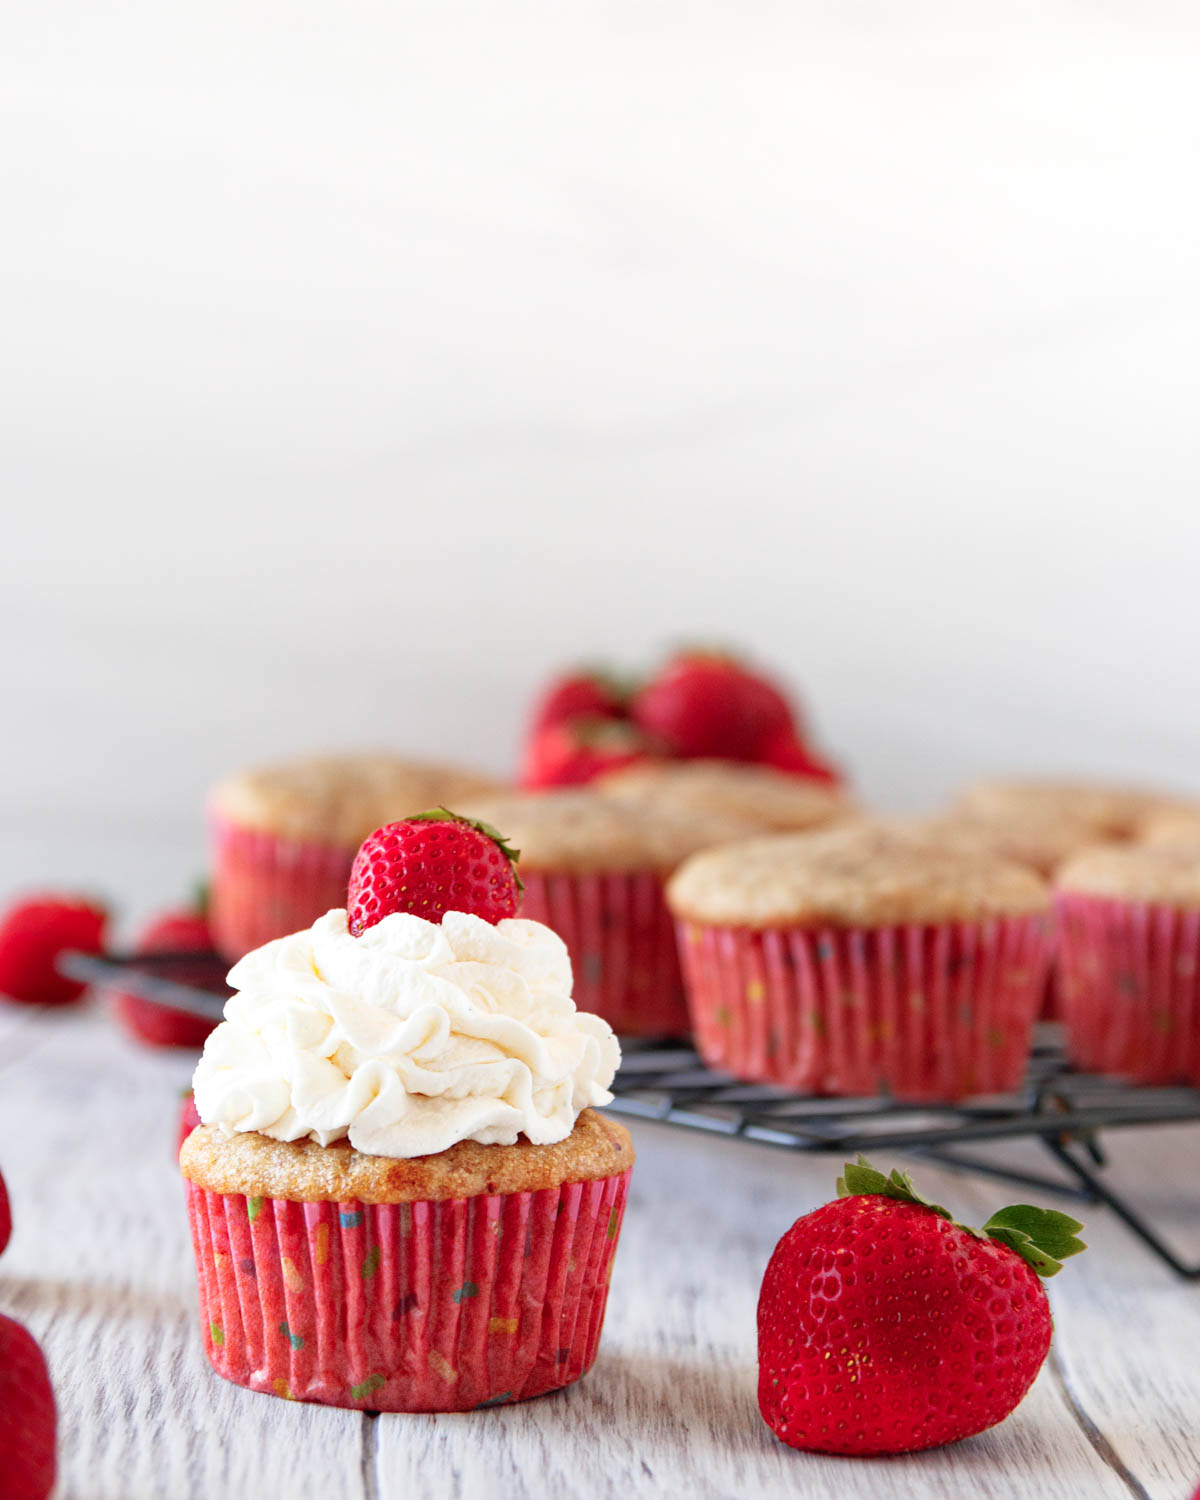 There is a decorated cupcake in the foreground of the image, but in the background you see a cooling rack full of undecorated cupcakes with a pink-ish hue - this is the natural color, not a bright pink.